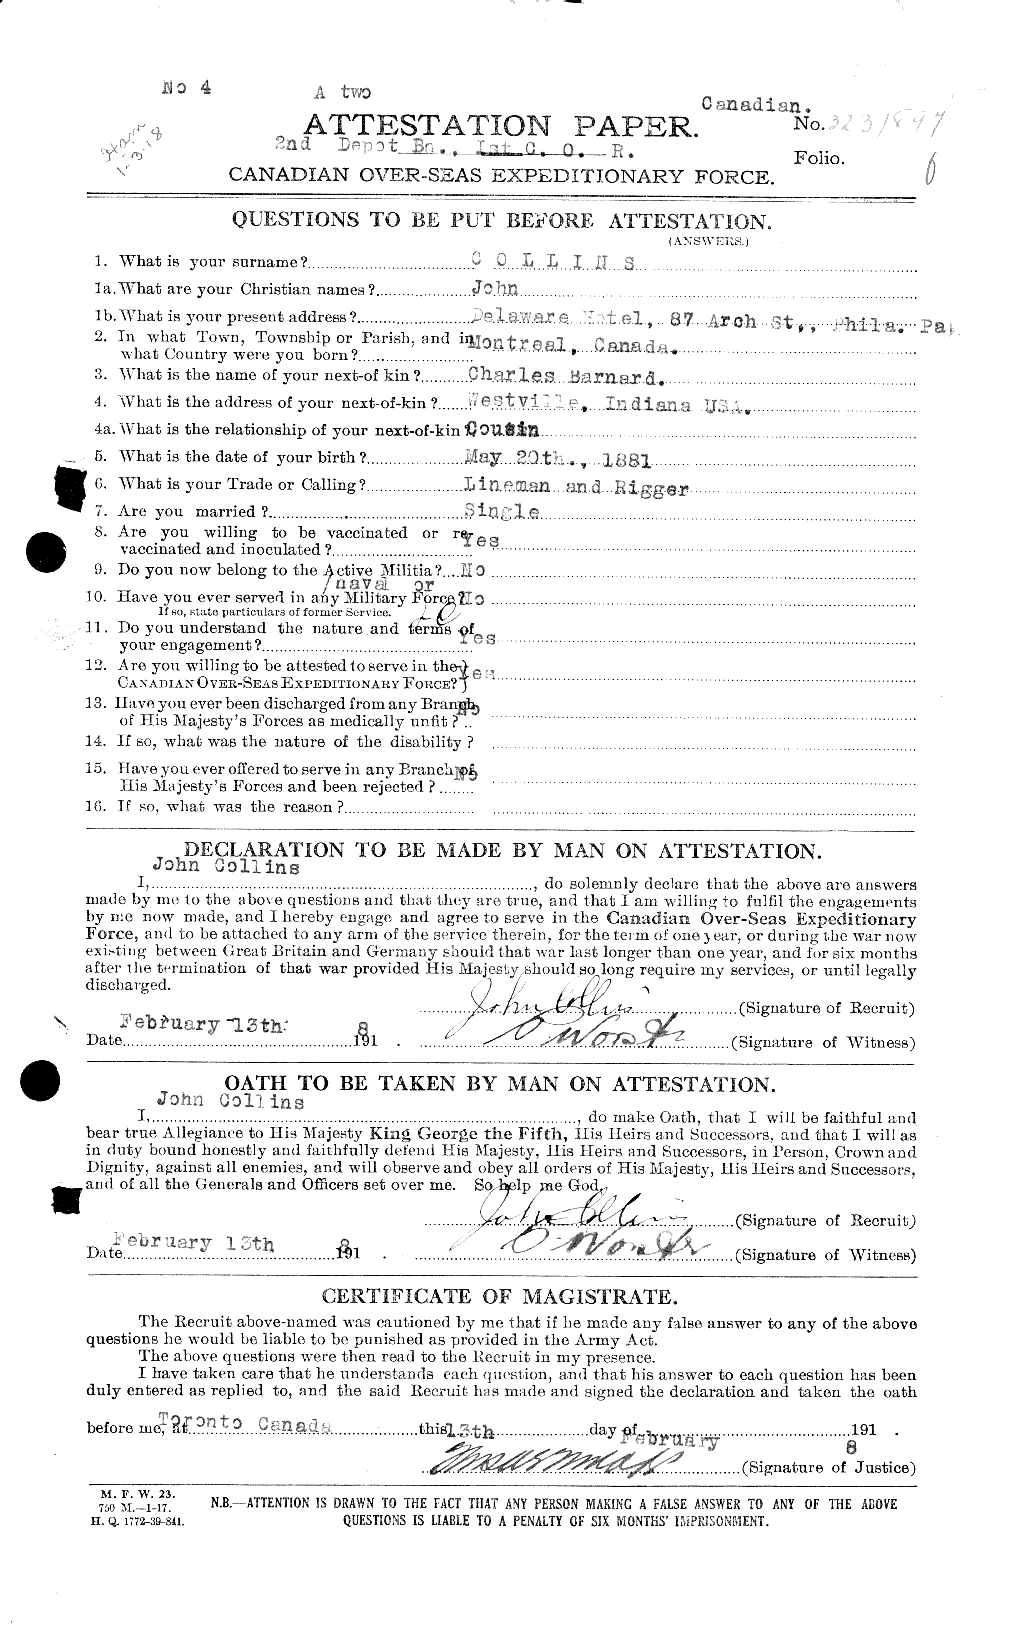 Personnel Records of the First World War - CEF 037996a